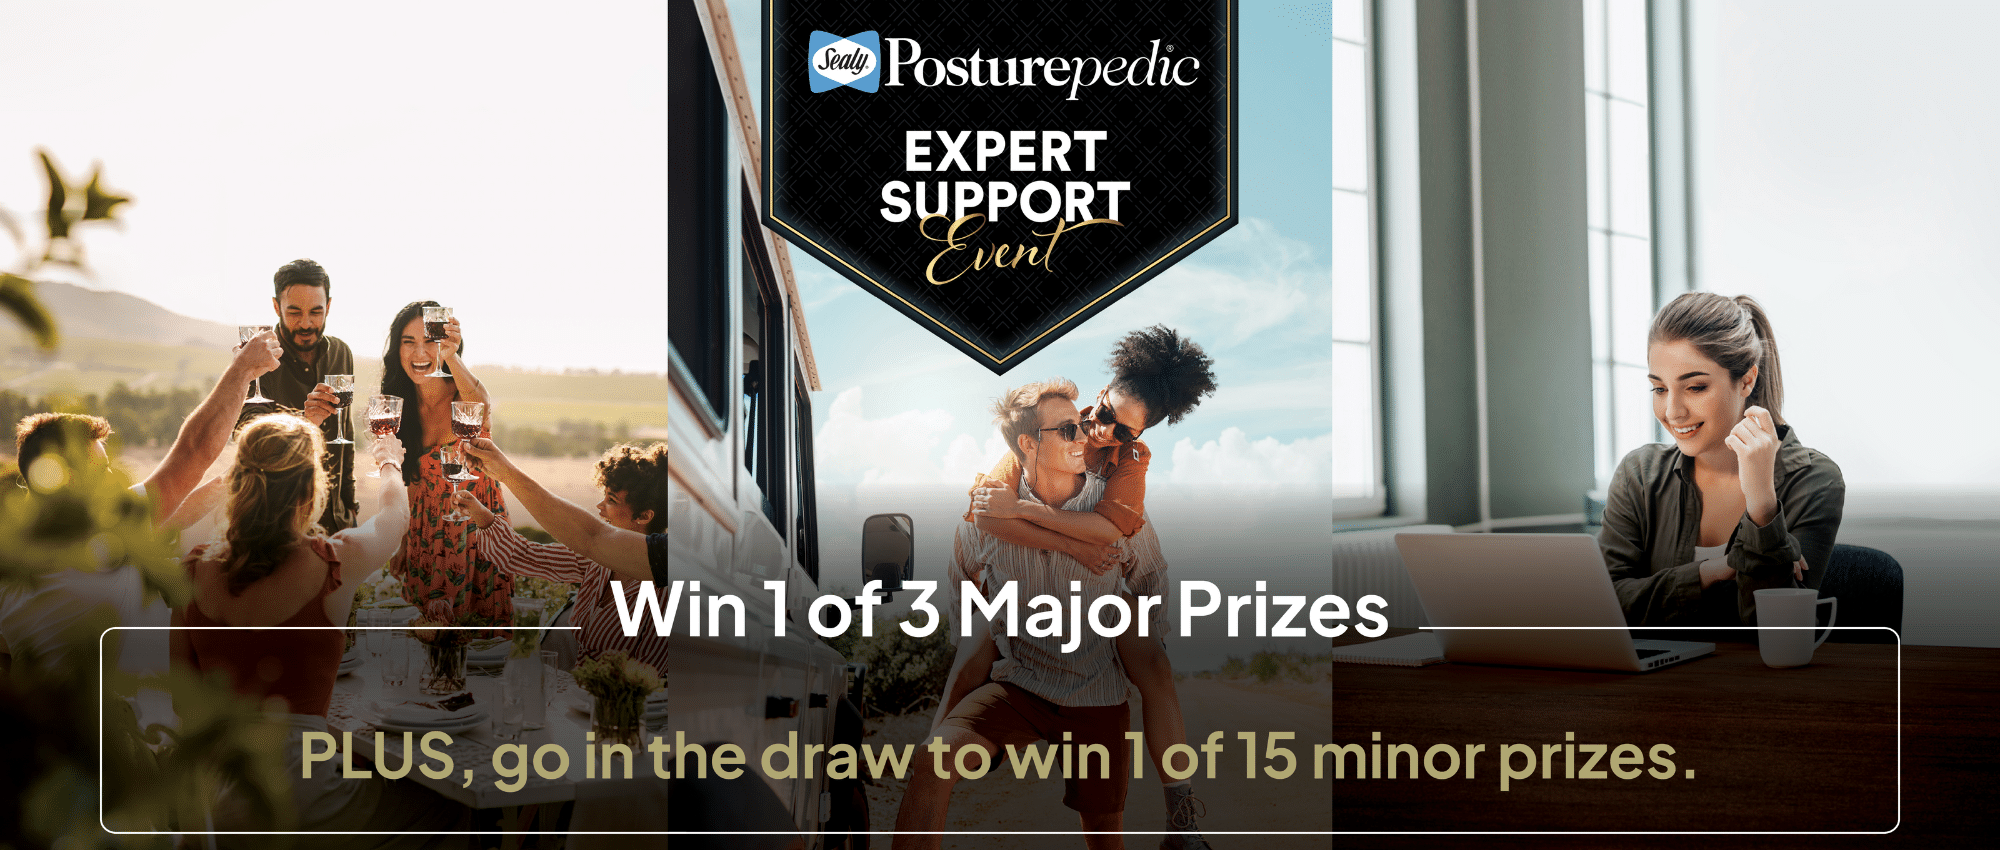 Expert Support Event Minor Prizes